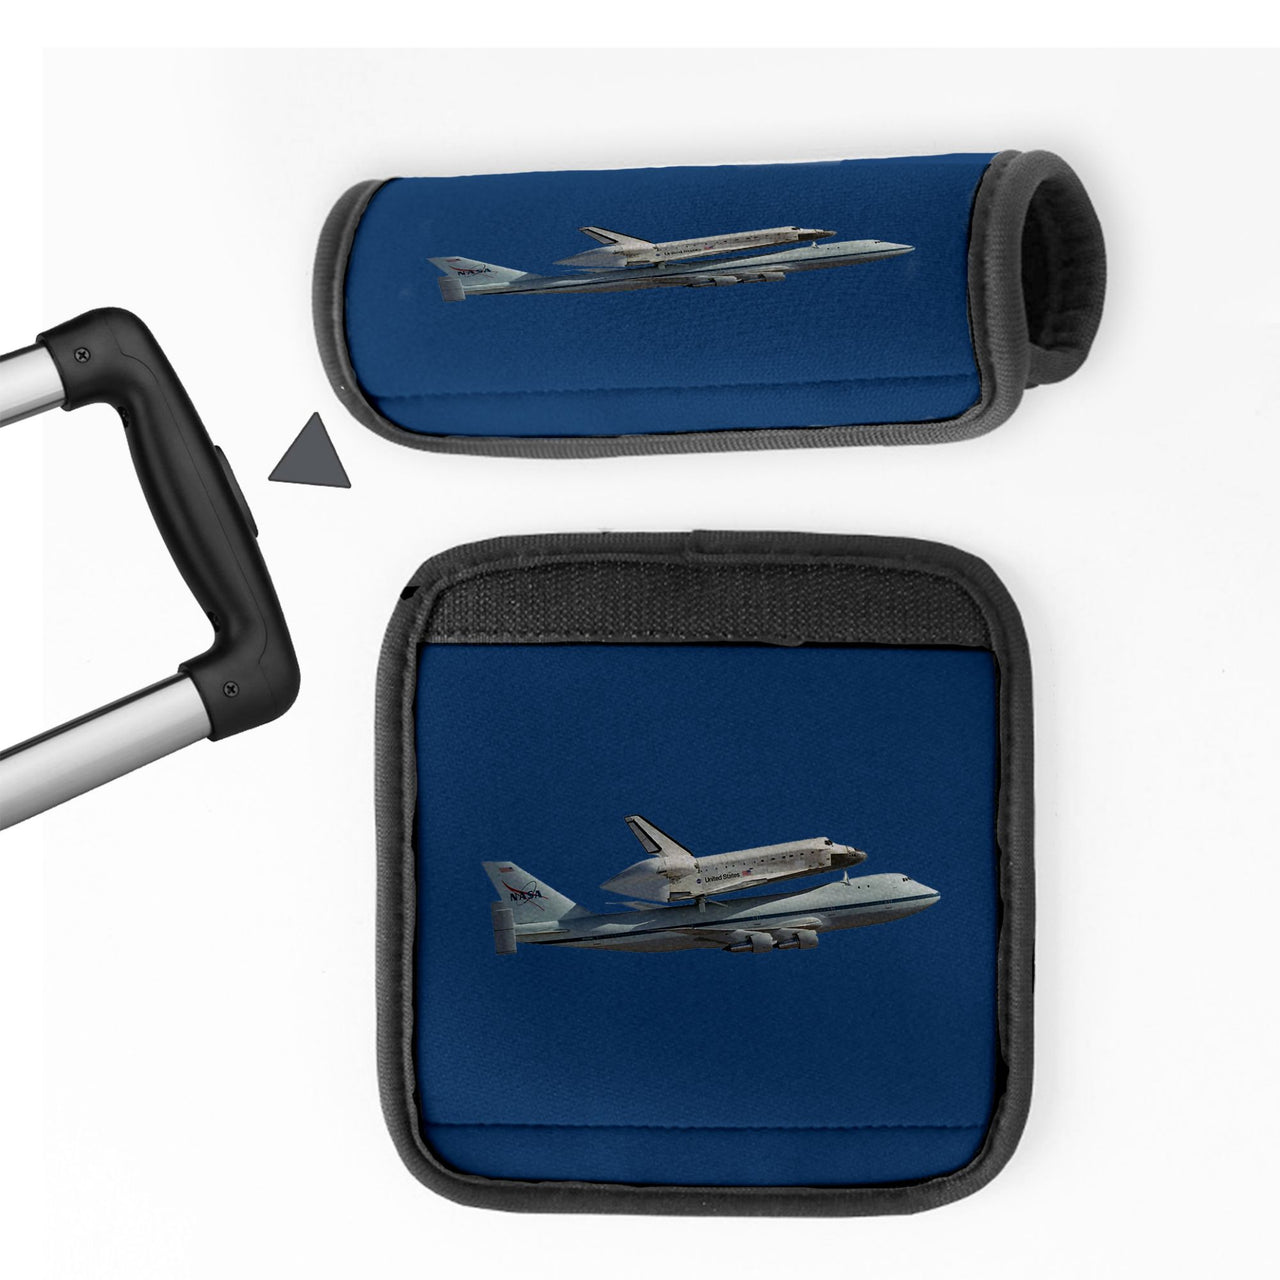 Space shuttle on 747 Designed Neoprene Luggage Handle Covers